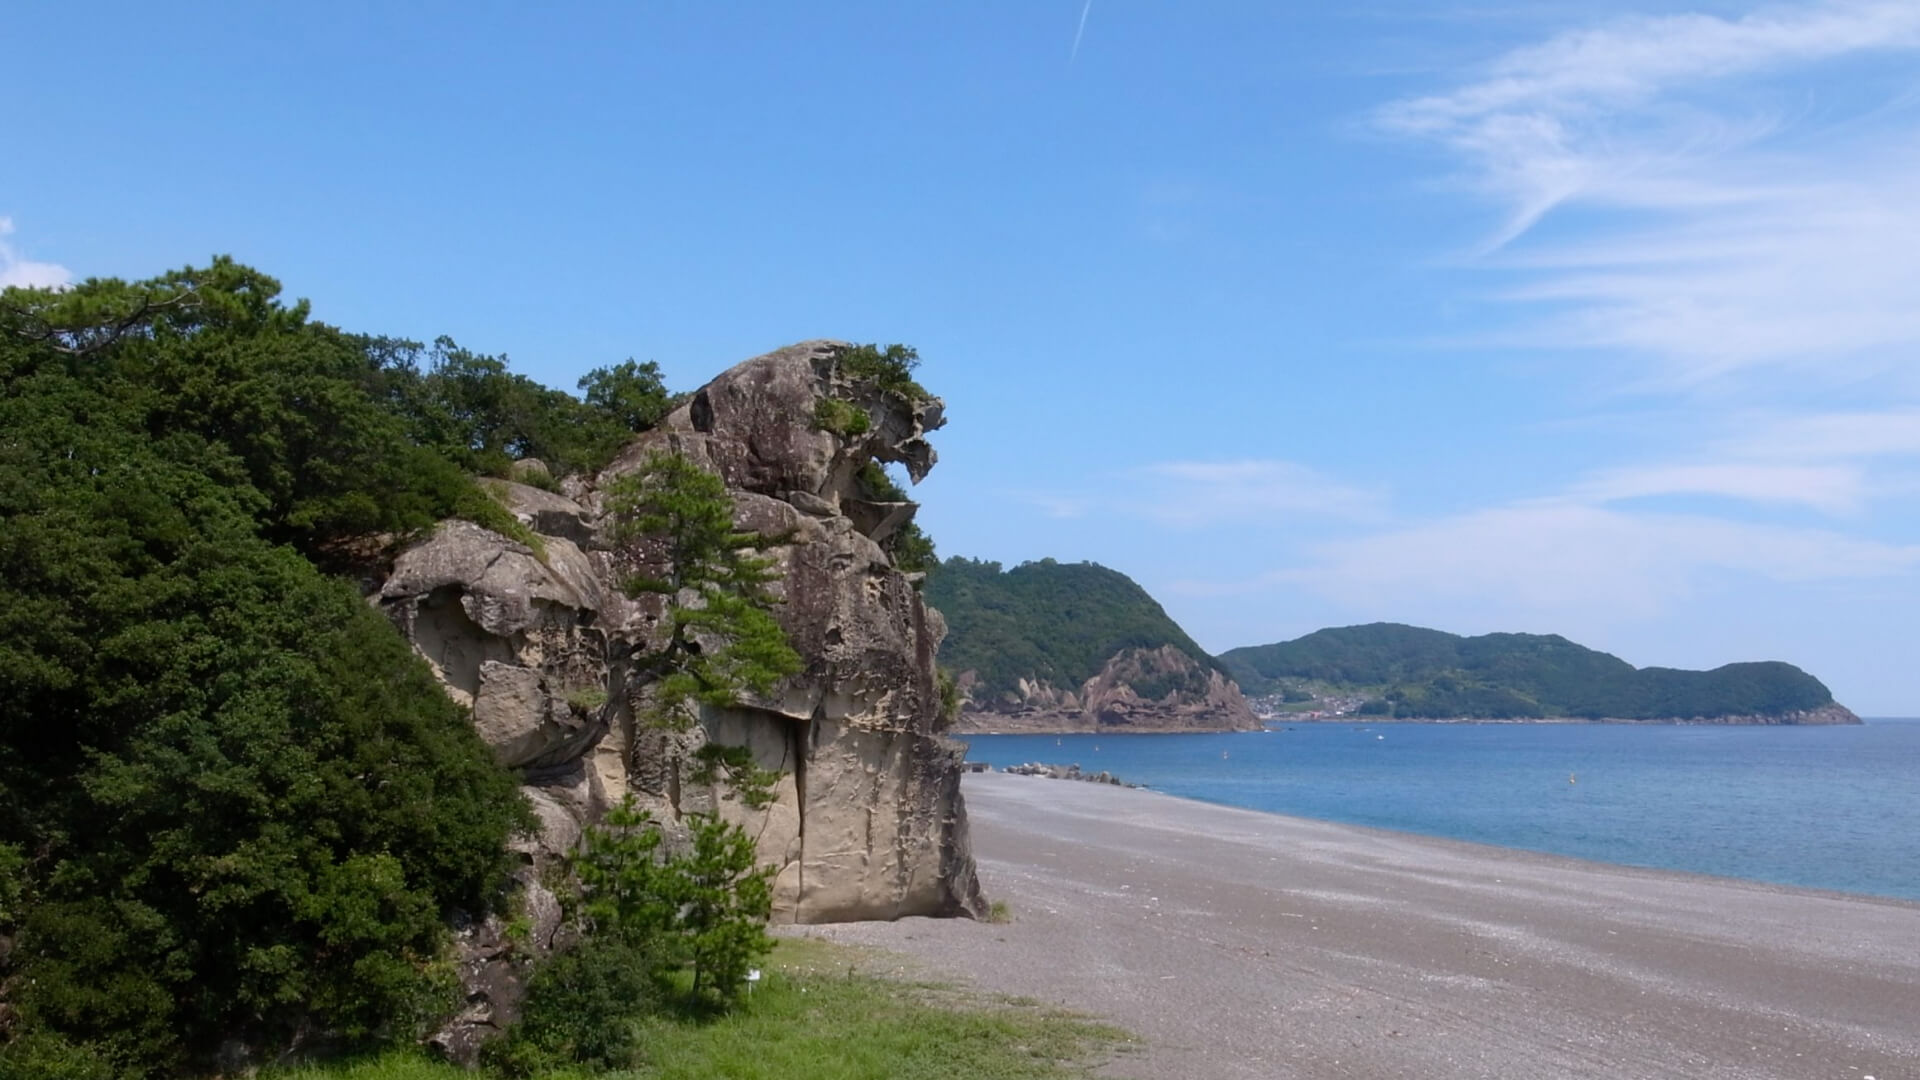 A journey of great trees and iwakura (worshiped rocks)